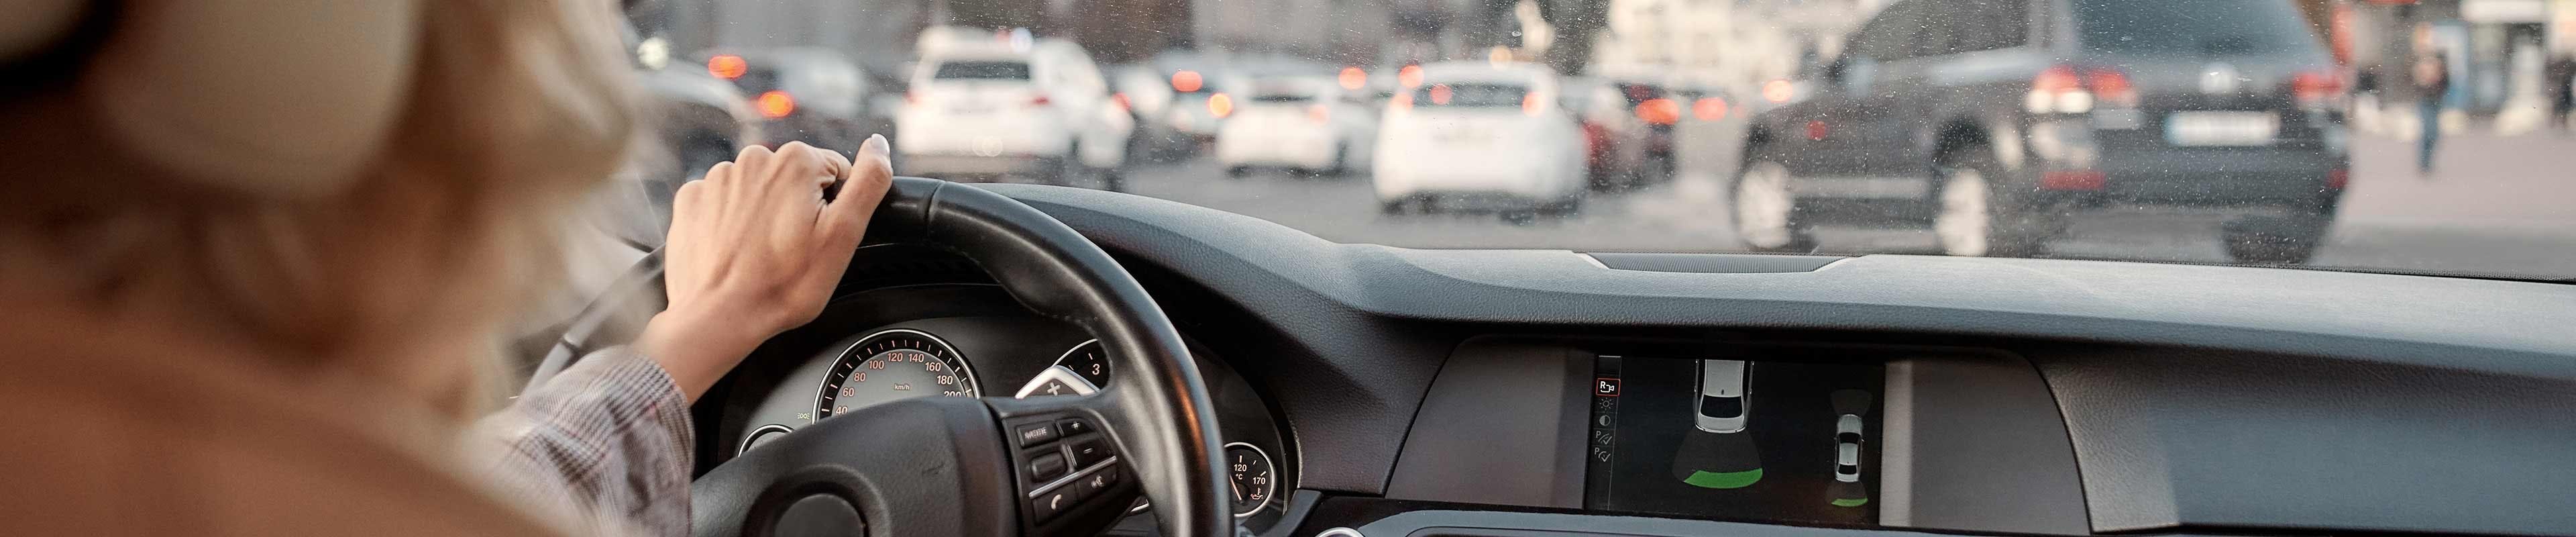 Image of a driver navigating her car through traffic.